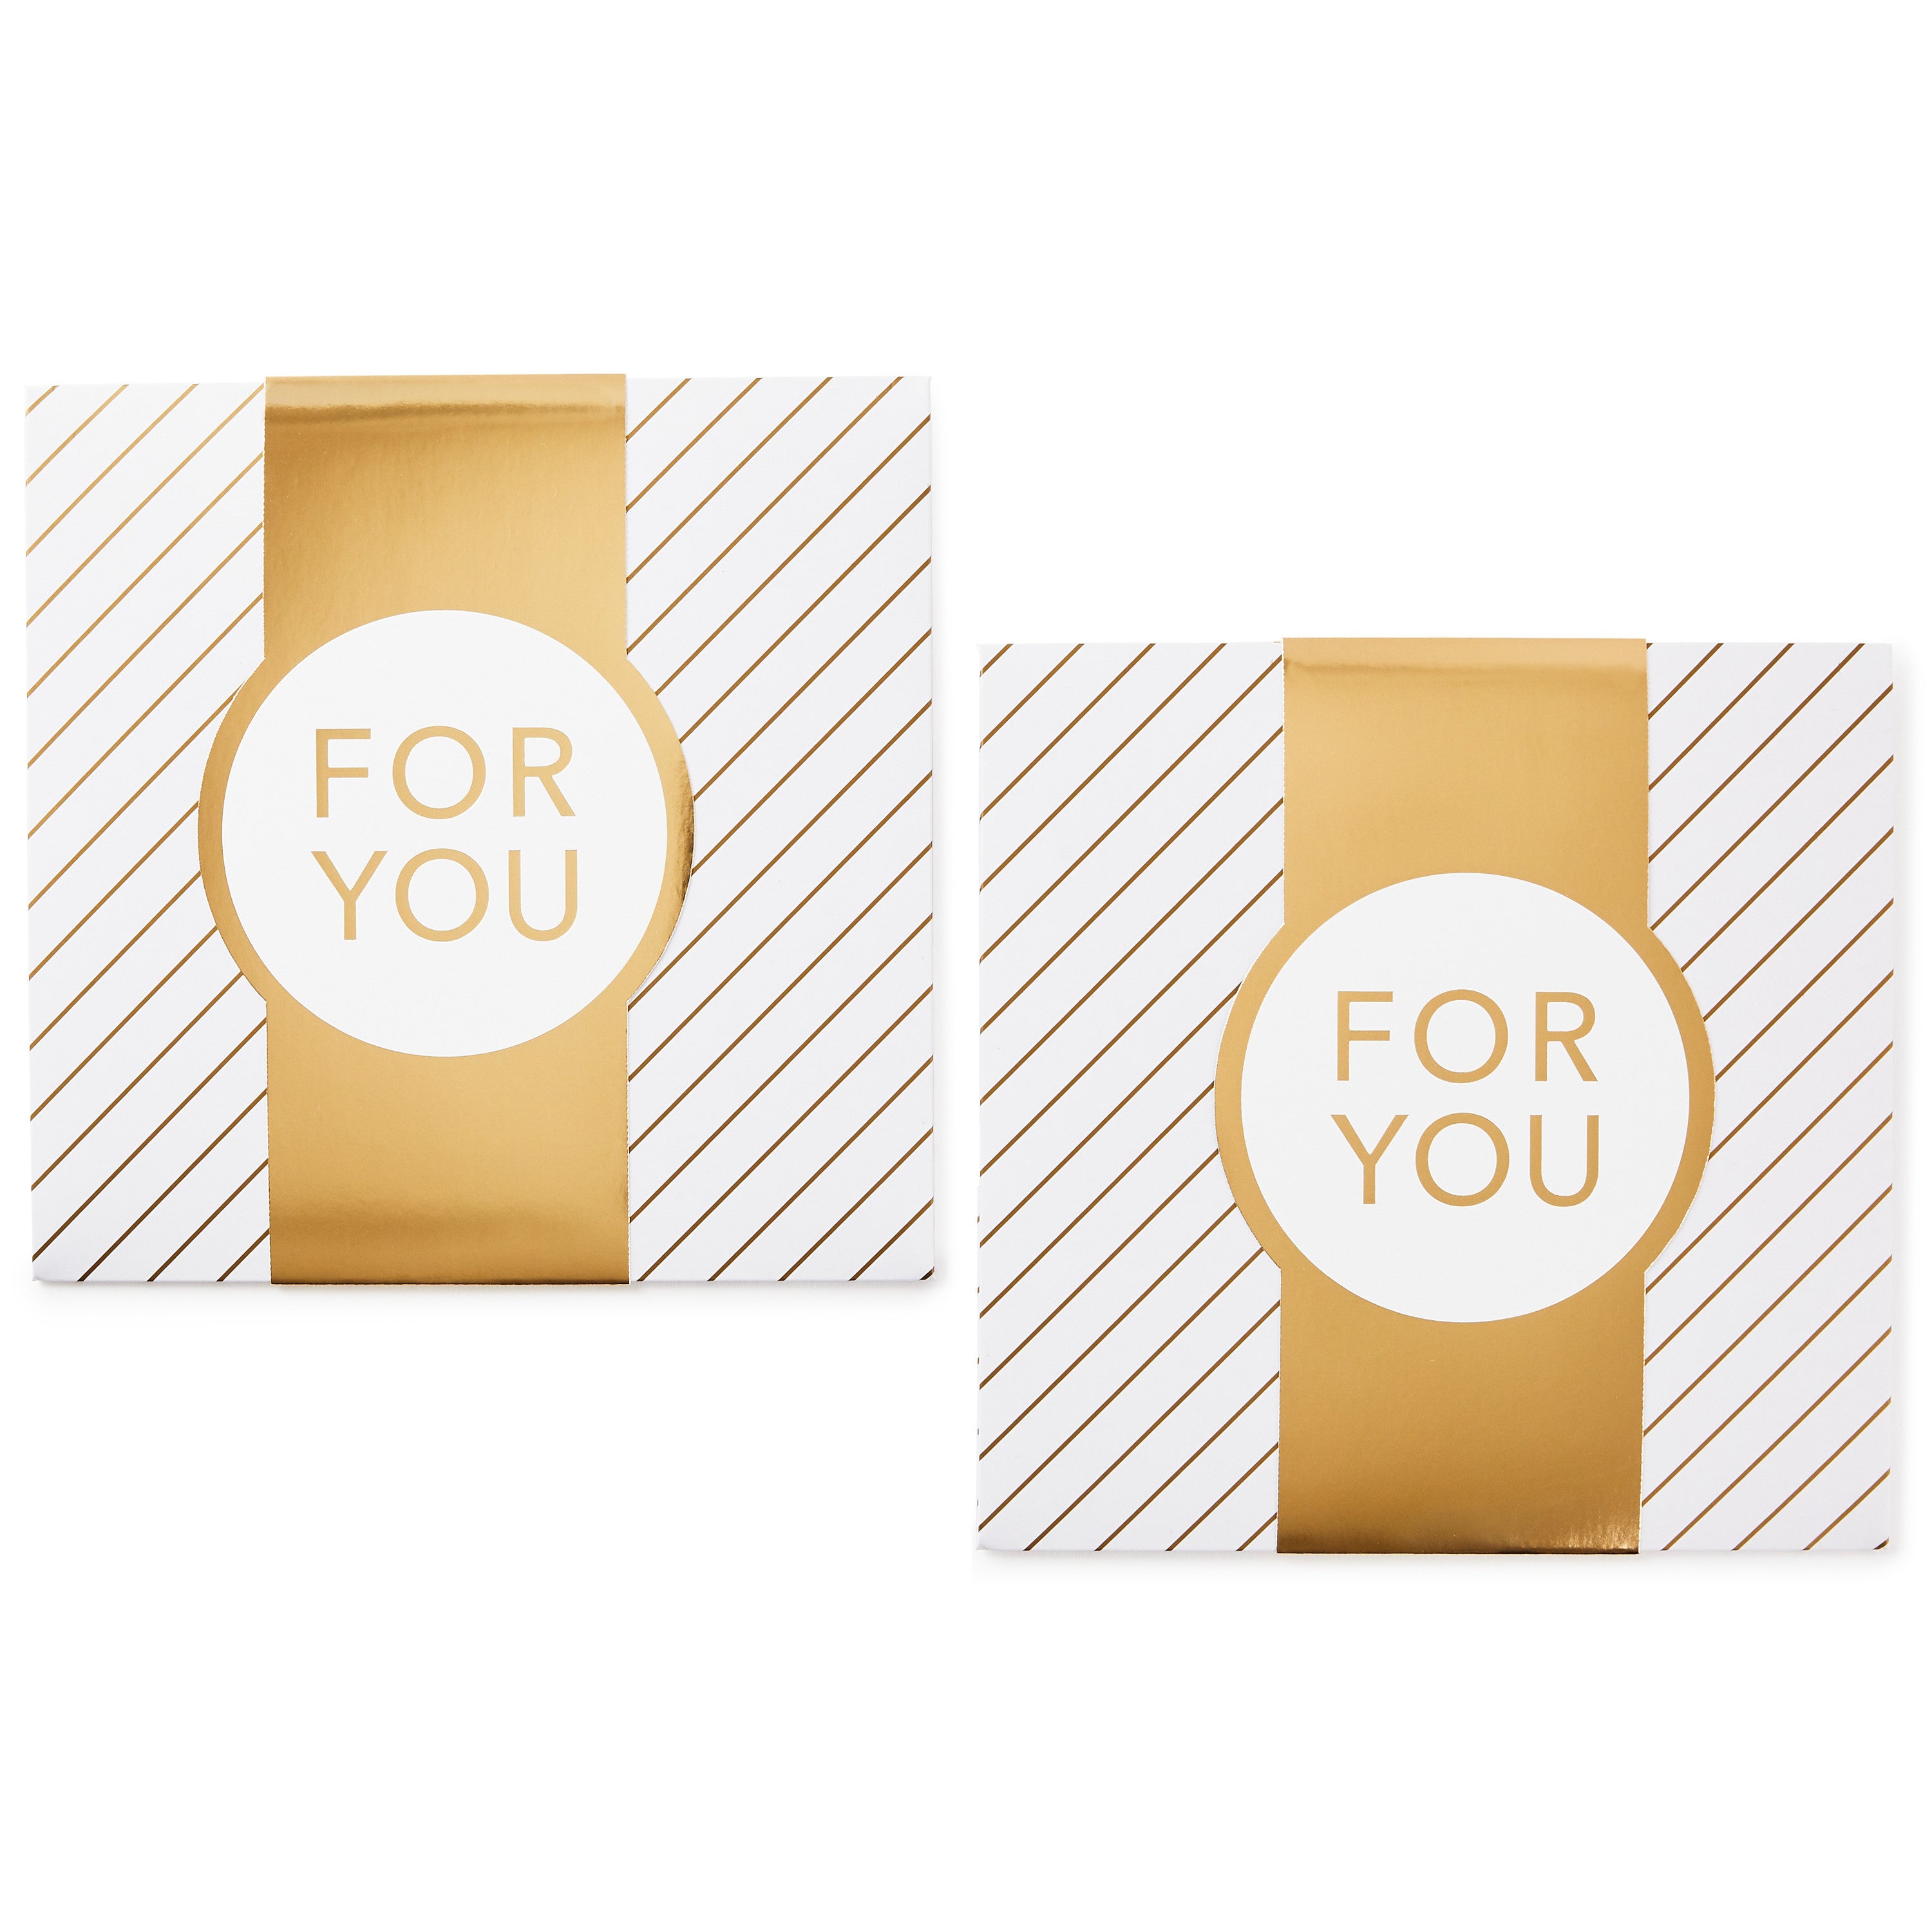 Hallmark 10" Large Gift Boxes with Wrap Bands (2-Pack: White and Gold, "For You") for Weddings, Graduations, Valentine's Day, Christmas, Hanukkah, Birthdays